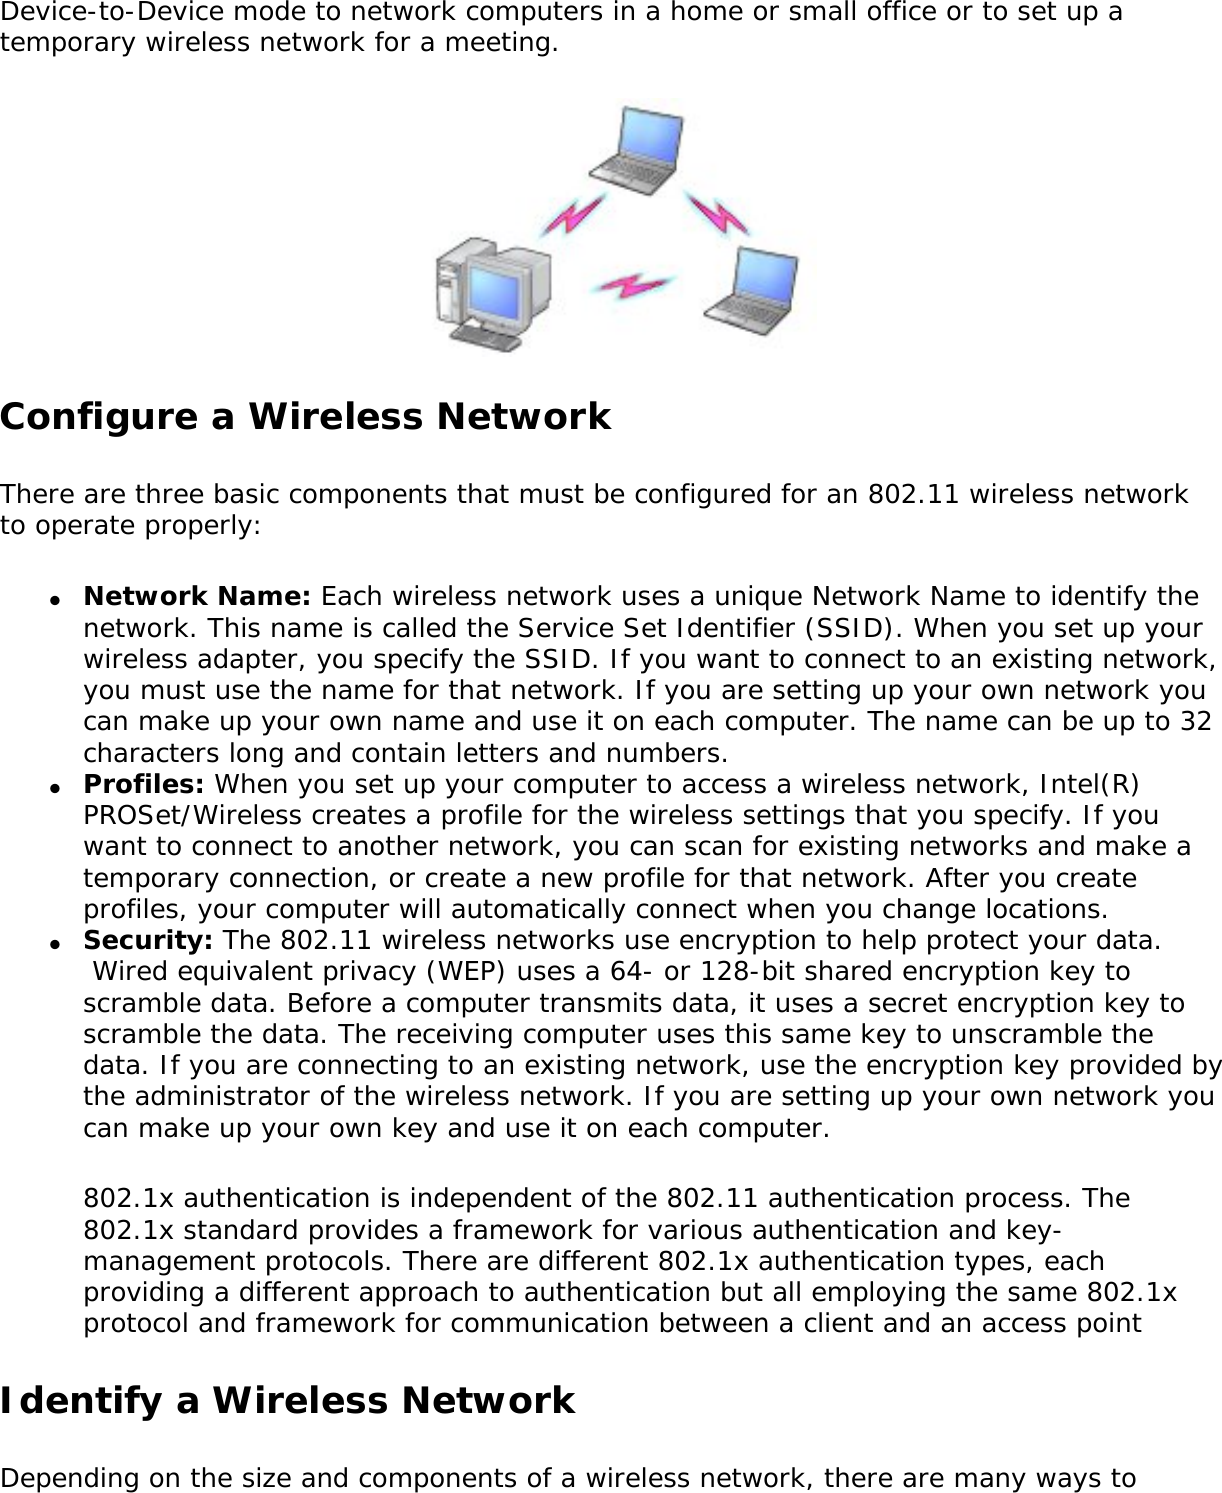 Device-to-Device mode to network computers in a home or small office or to set up a temporary wireless network for a meeting. Configure a Wireless NetworkThere are three basic components that must be configured for an 802.11 wireless network to operate properly: ●     Network Name: Each wireless network uses a unique Network Name to identify the network. This name is called the Service Set Identifier (SSID). When you set up your wireless adapter, you specify the SSID. If you want to connect to an existing network, you must use the name for that network. If you are setting up your own network you can make up your own name and use it on each computer. The name can be up to 32 characters long and contain letters and numbers.●     Profiles: When you set up your computer to access a wireless network, Intel(R) PROSet/Wireless creates a profile for the wireless settings that you specify. If you want to connect to another network, you can scan for existing networks and make a temporary connection, or create a new profile for that network. After you create profiles, your computer will automatically connect when you change locations.●     Security: The 802.11 wireless networks use encryption to help protect your data.  Wired equivalent privacy (WEP) uses a 64- or 128-bit shared encryption key to scramble data. Before a computer transmits data, it uses a secret encryption key to scramble the data. The receiving computer uses this same key to unscramble the data. If you are connecting to an existing network, use the encryption key provided by the administrator of the wireless network. If you are setting up your own network you can make up your own key and use it on each computer. 802.1x authentication is independent of the 802.11 authentication process. The 802.1x standard provides a framework for various authentication and key-management protocols. There are different 802.1x authentication types, each providing a different approach to authentication but all employing the same 802.1x protocol and framework for communication between a client and an access point Identify a Wireless NetworkDepending on the size and components of a wireless network, there are many ways to 